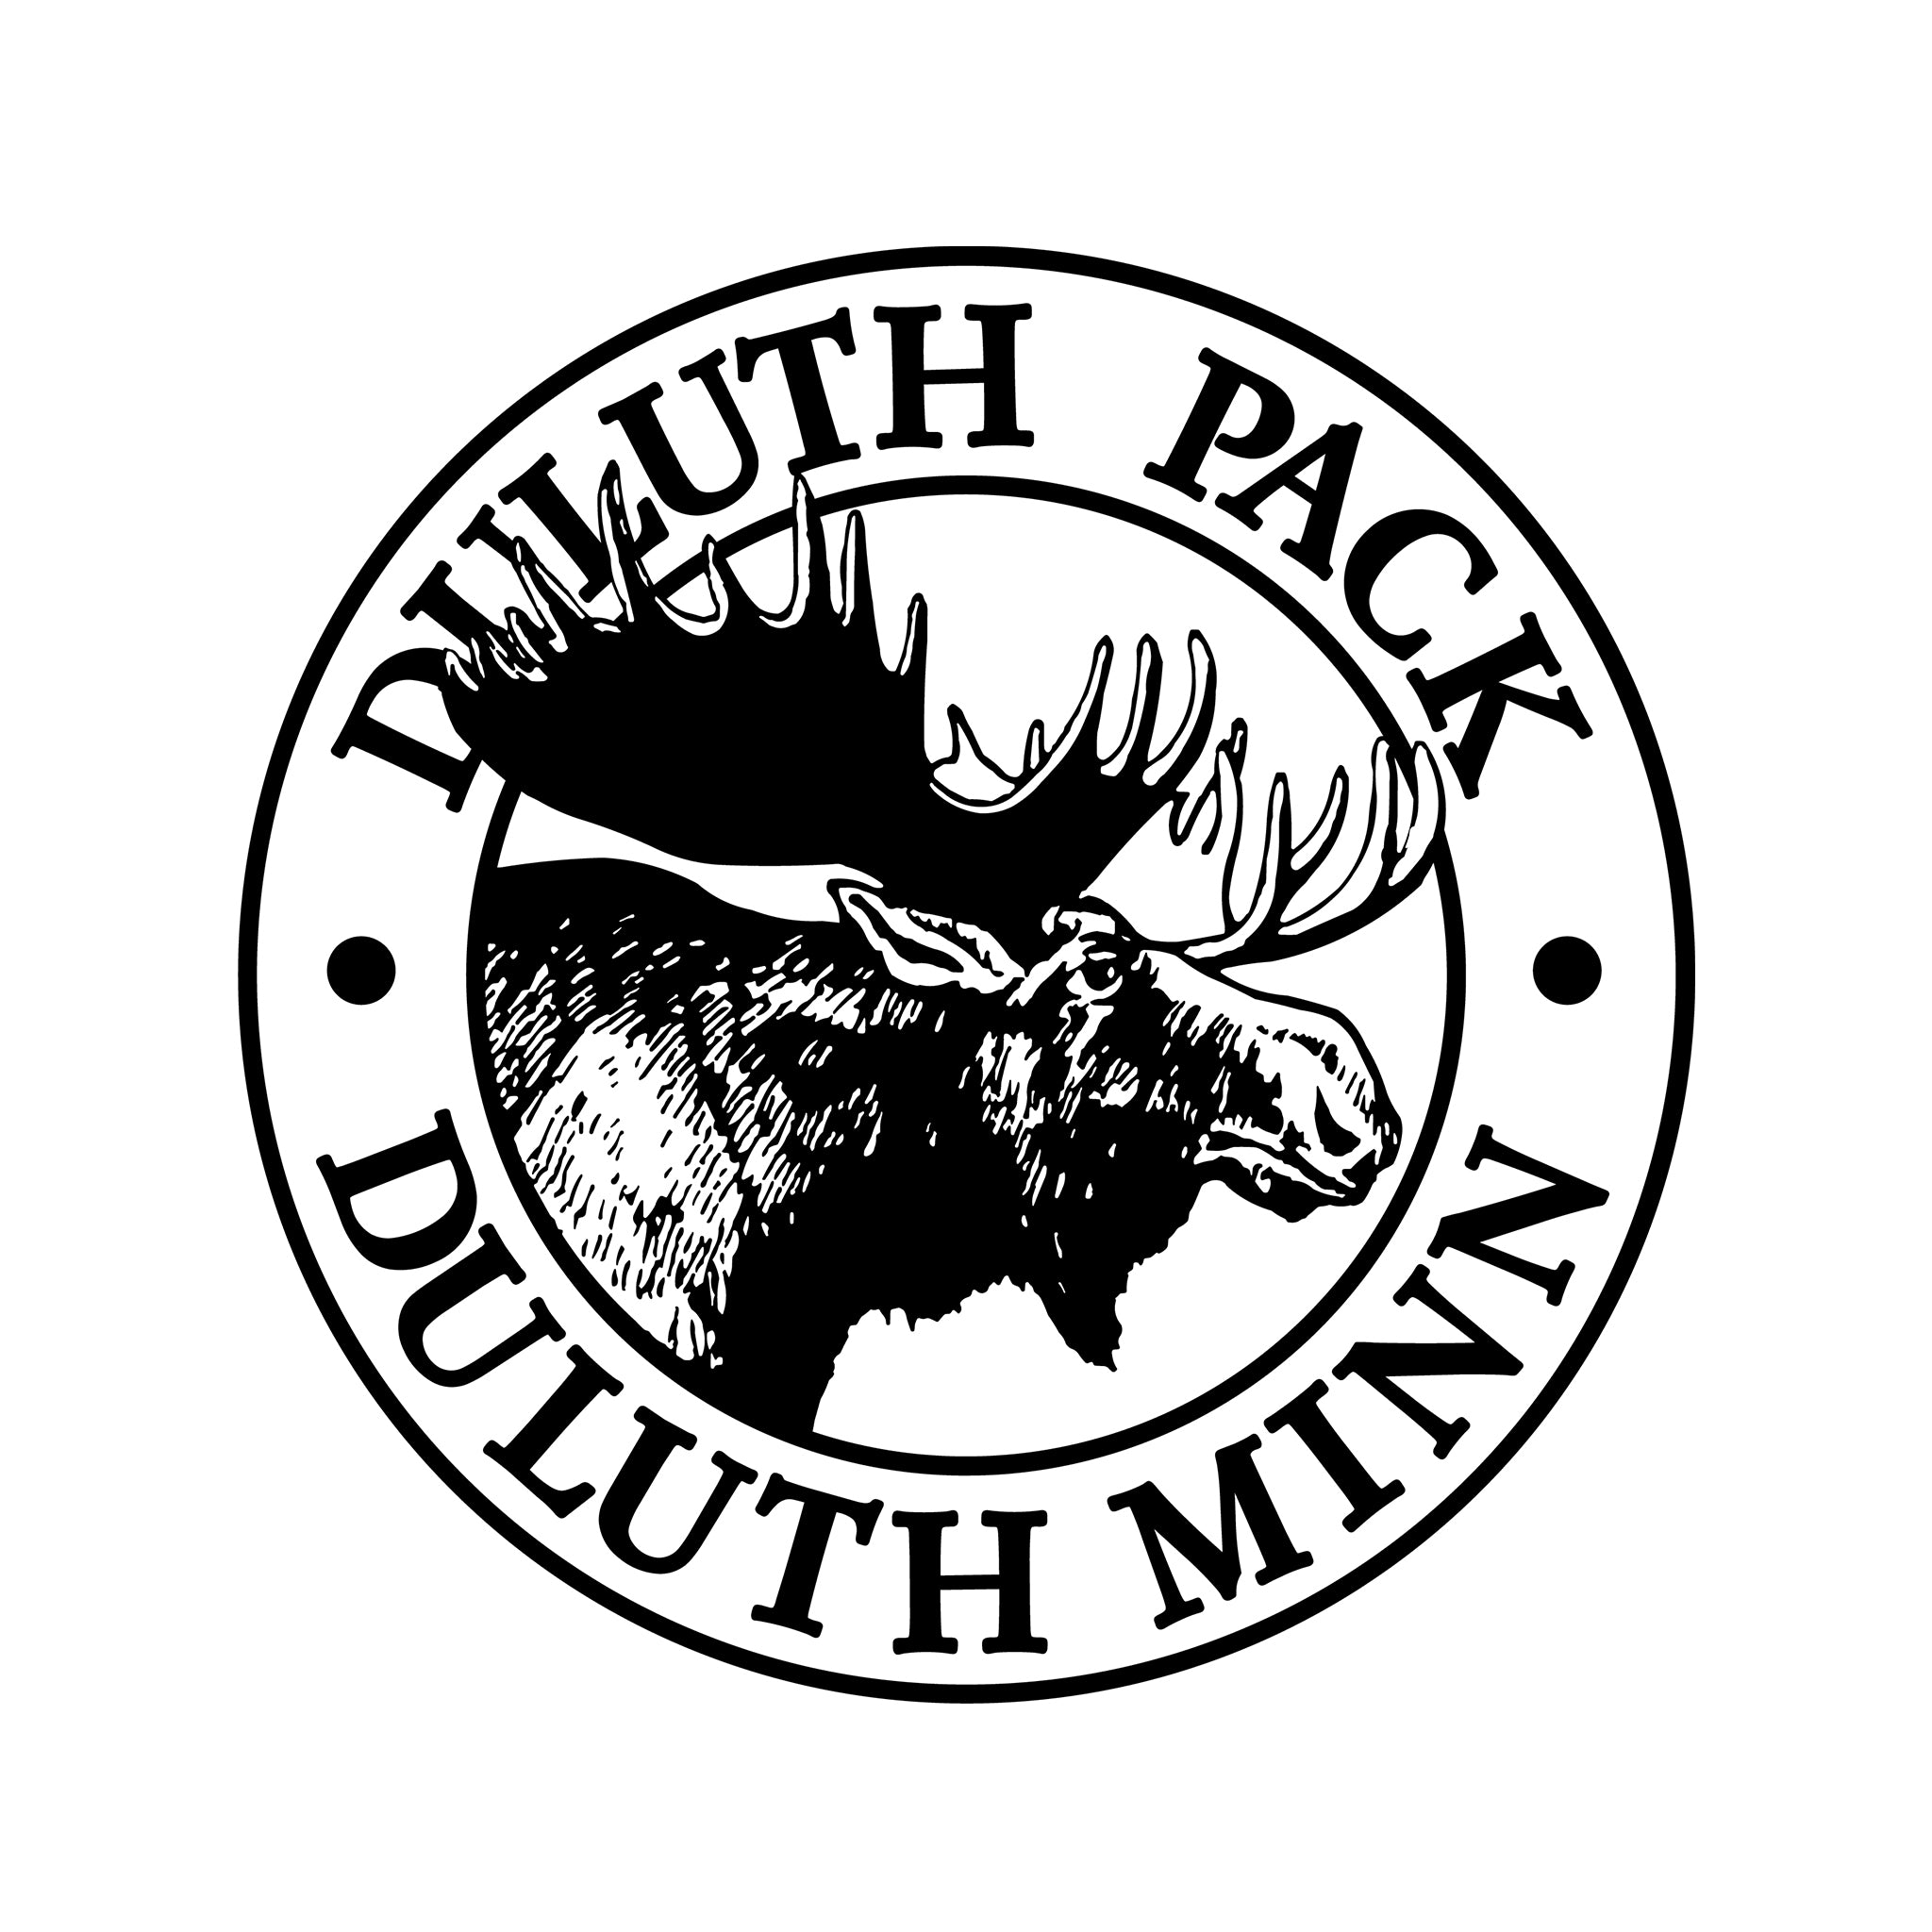 Duluth Pack